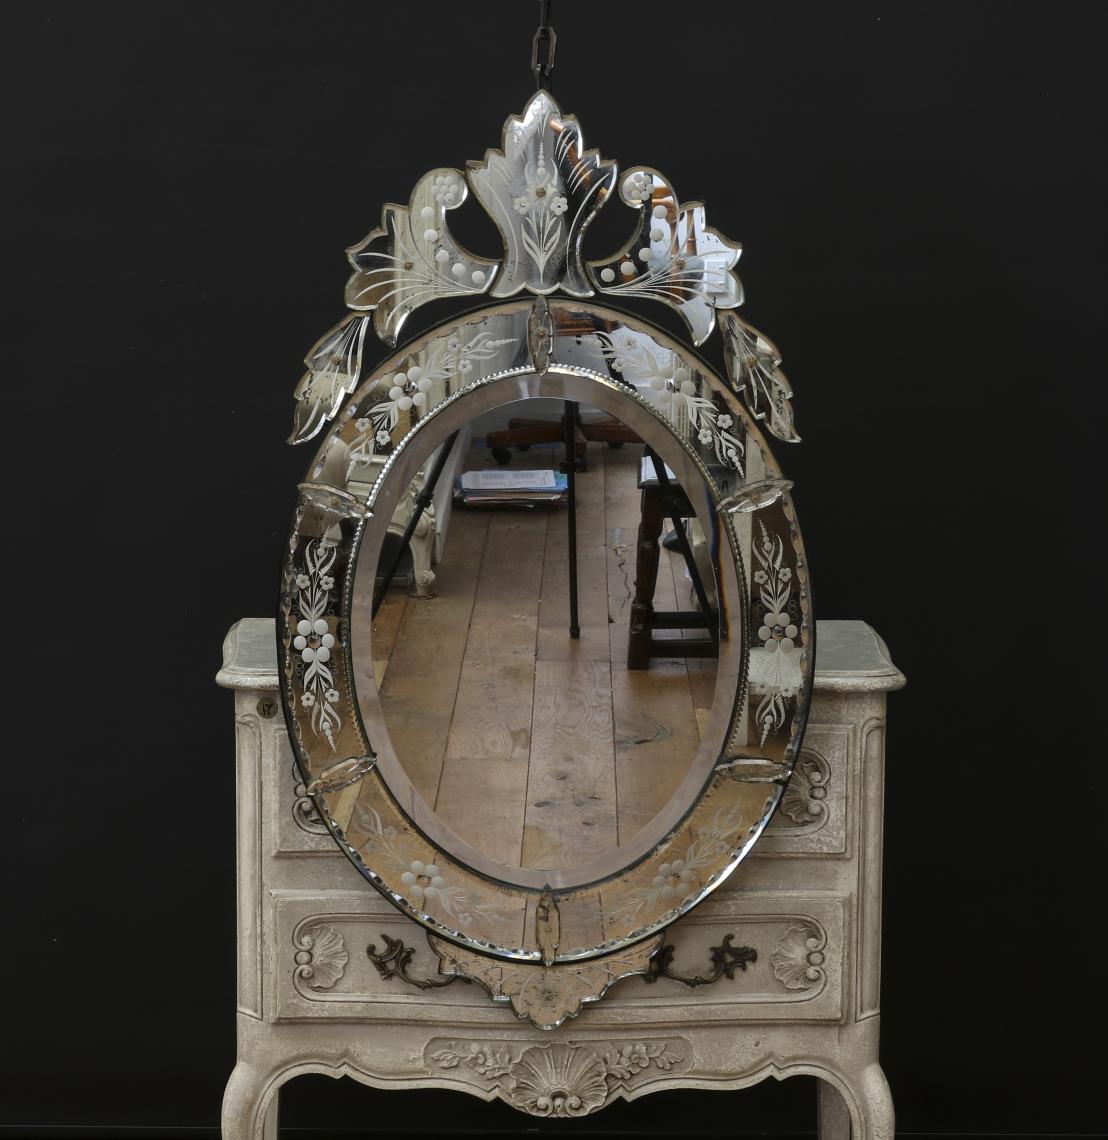 John Stephens & Company  Louis Philippe Mirror with Crest (Stock Number  132-68)